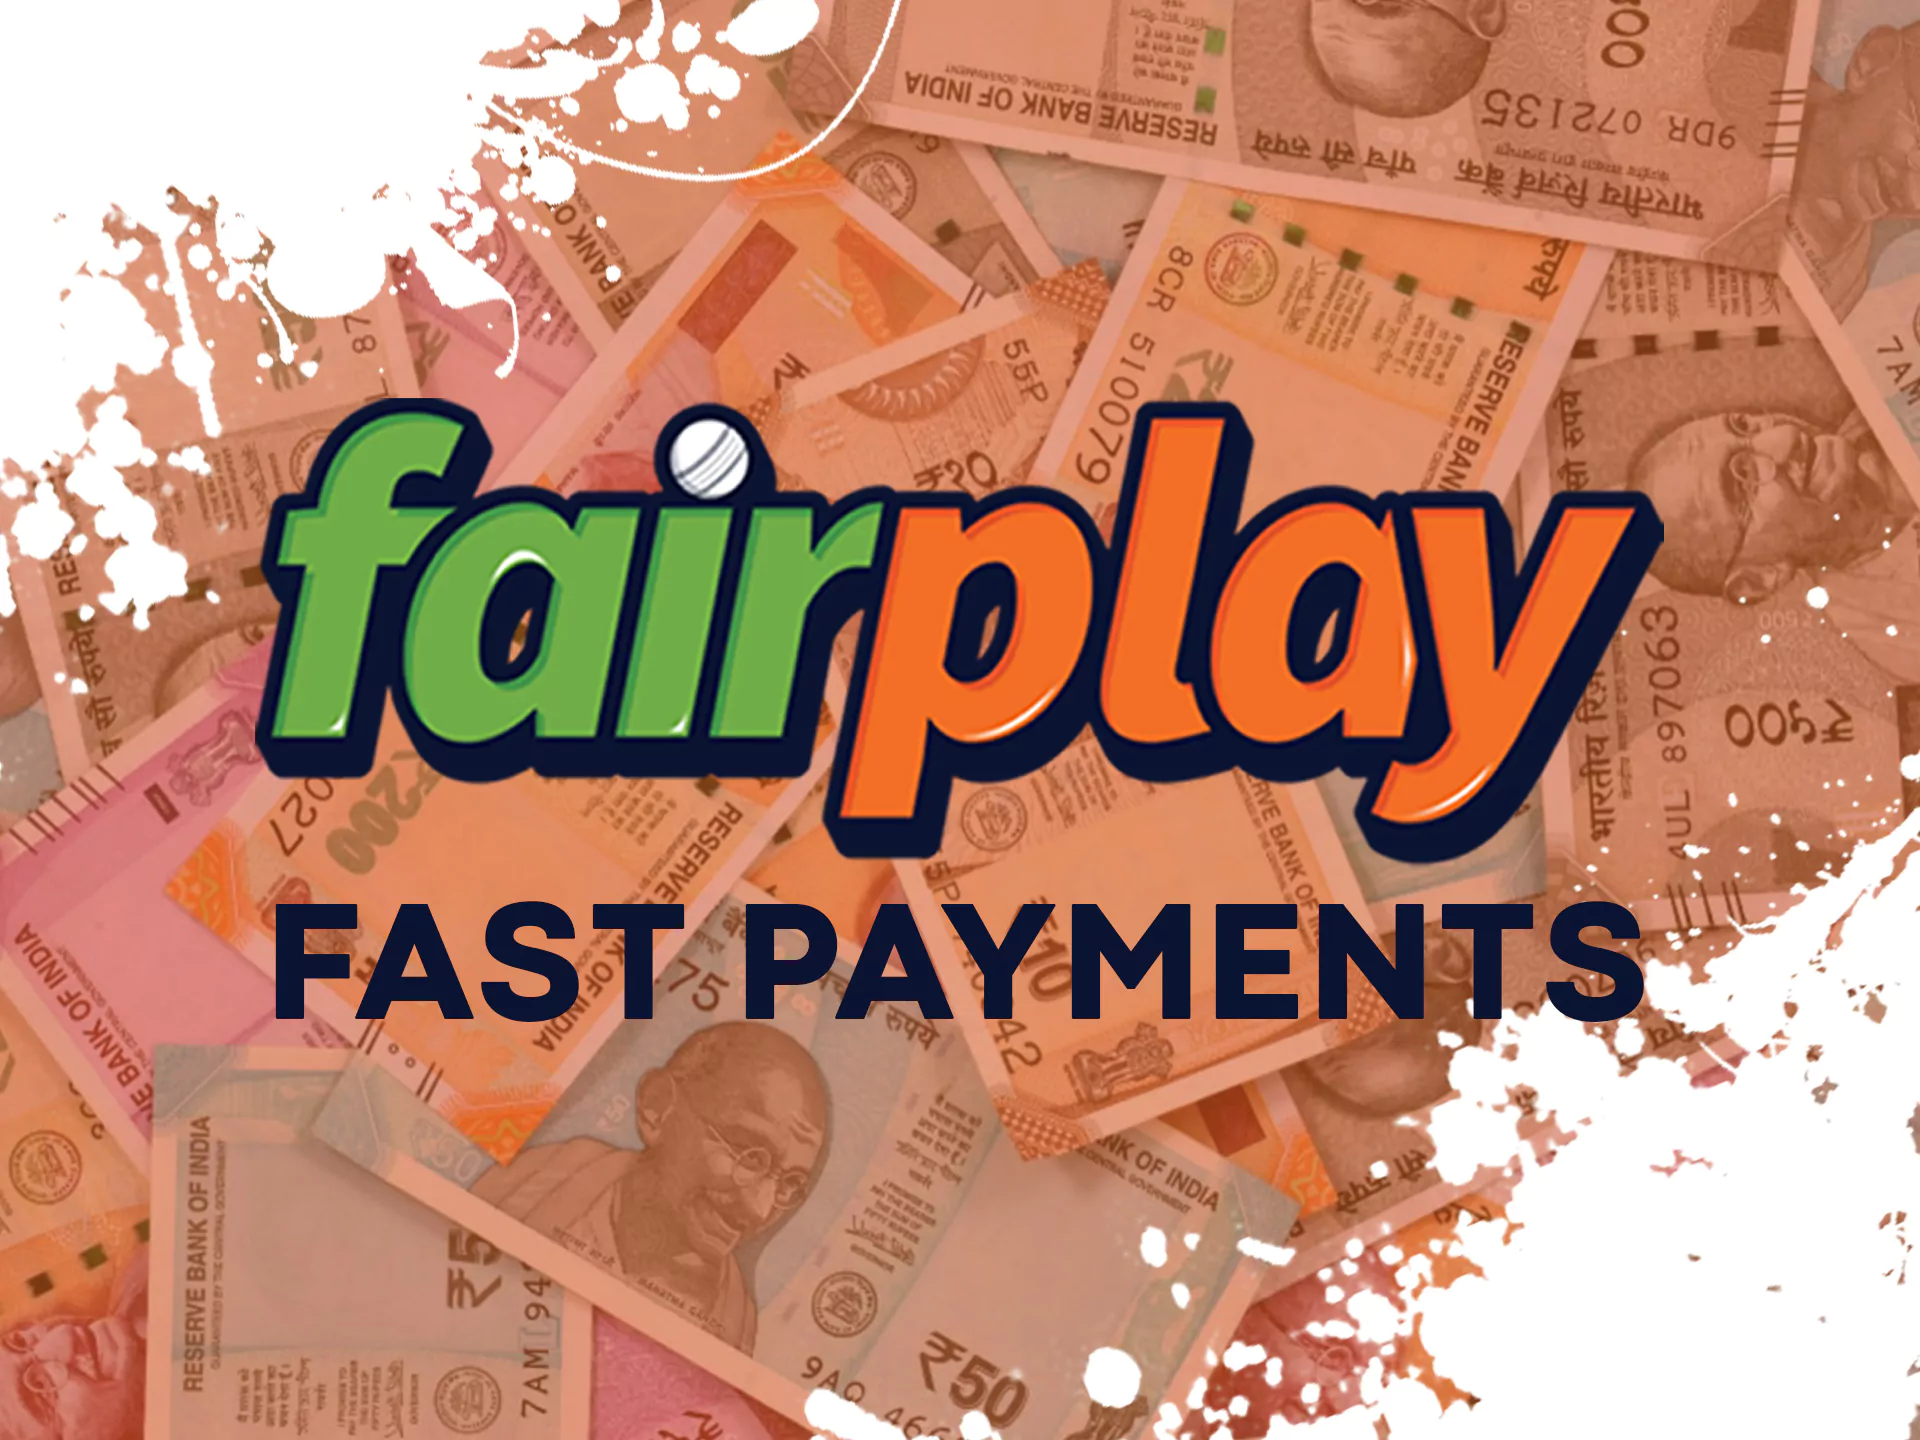 Deposit without problems at Fairplay.